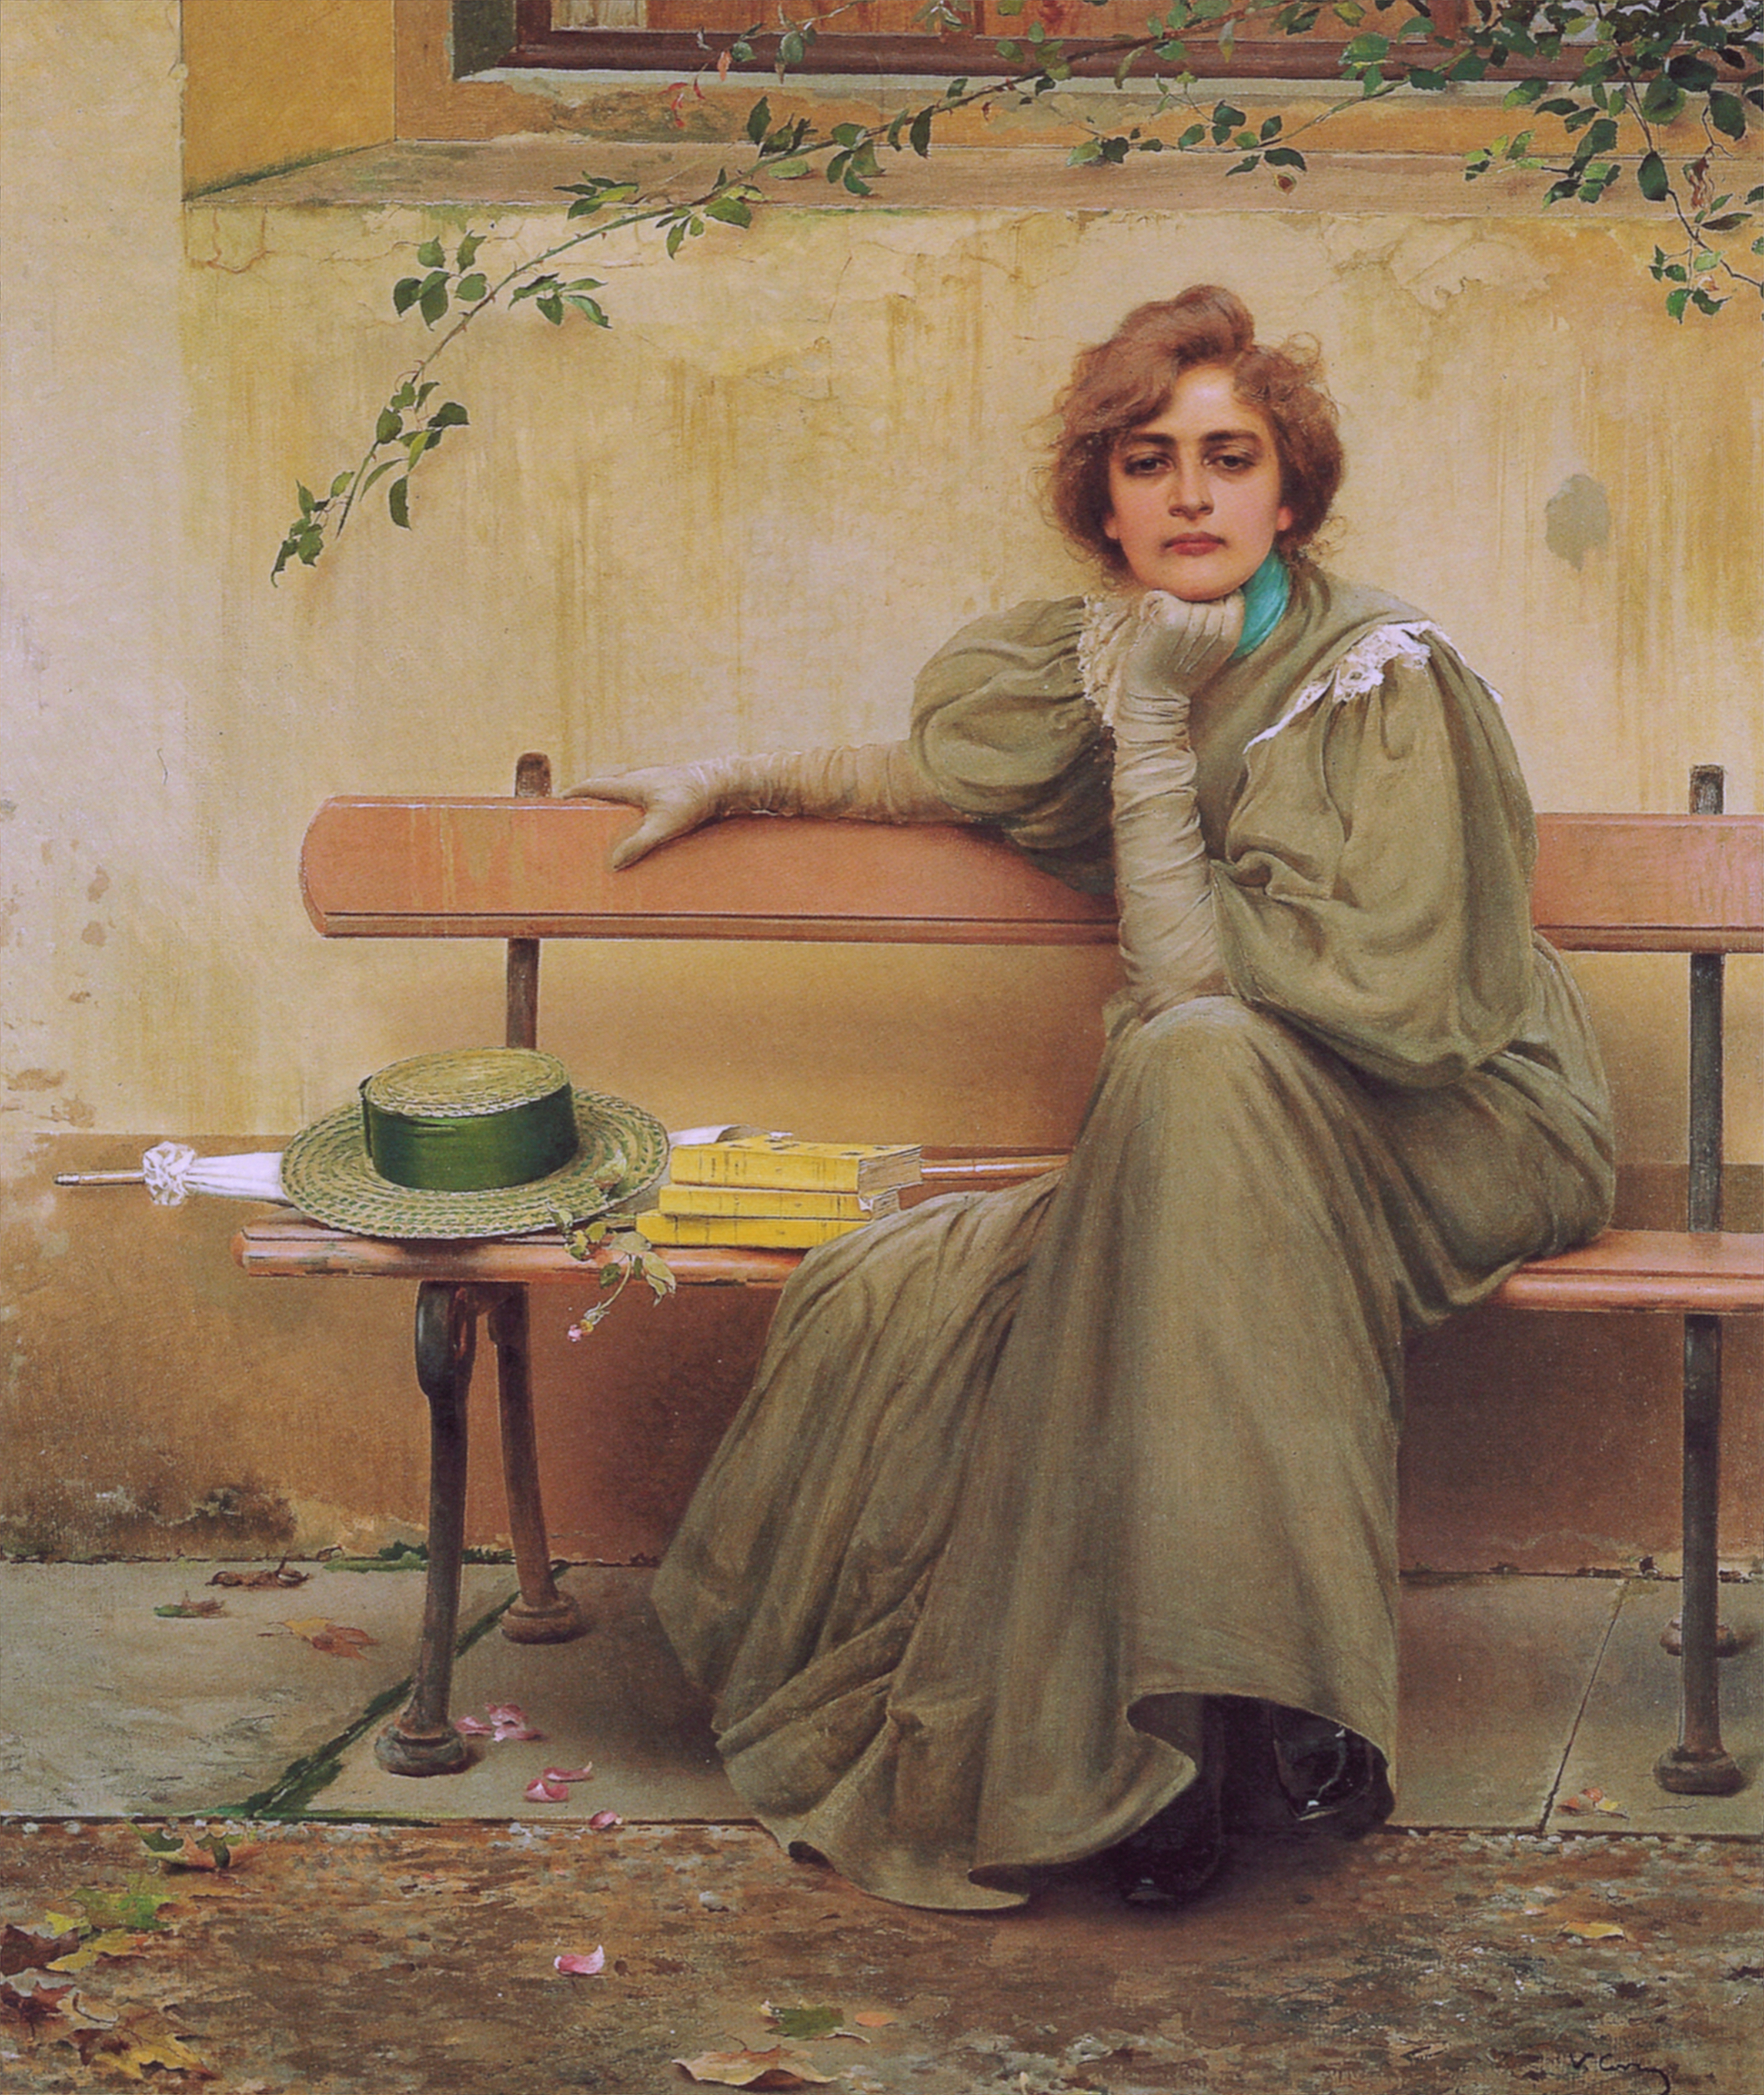 Sny by Vittorio Matteo Corcos - 1896 - 160 × 135 cm 